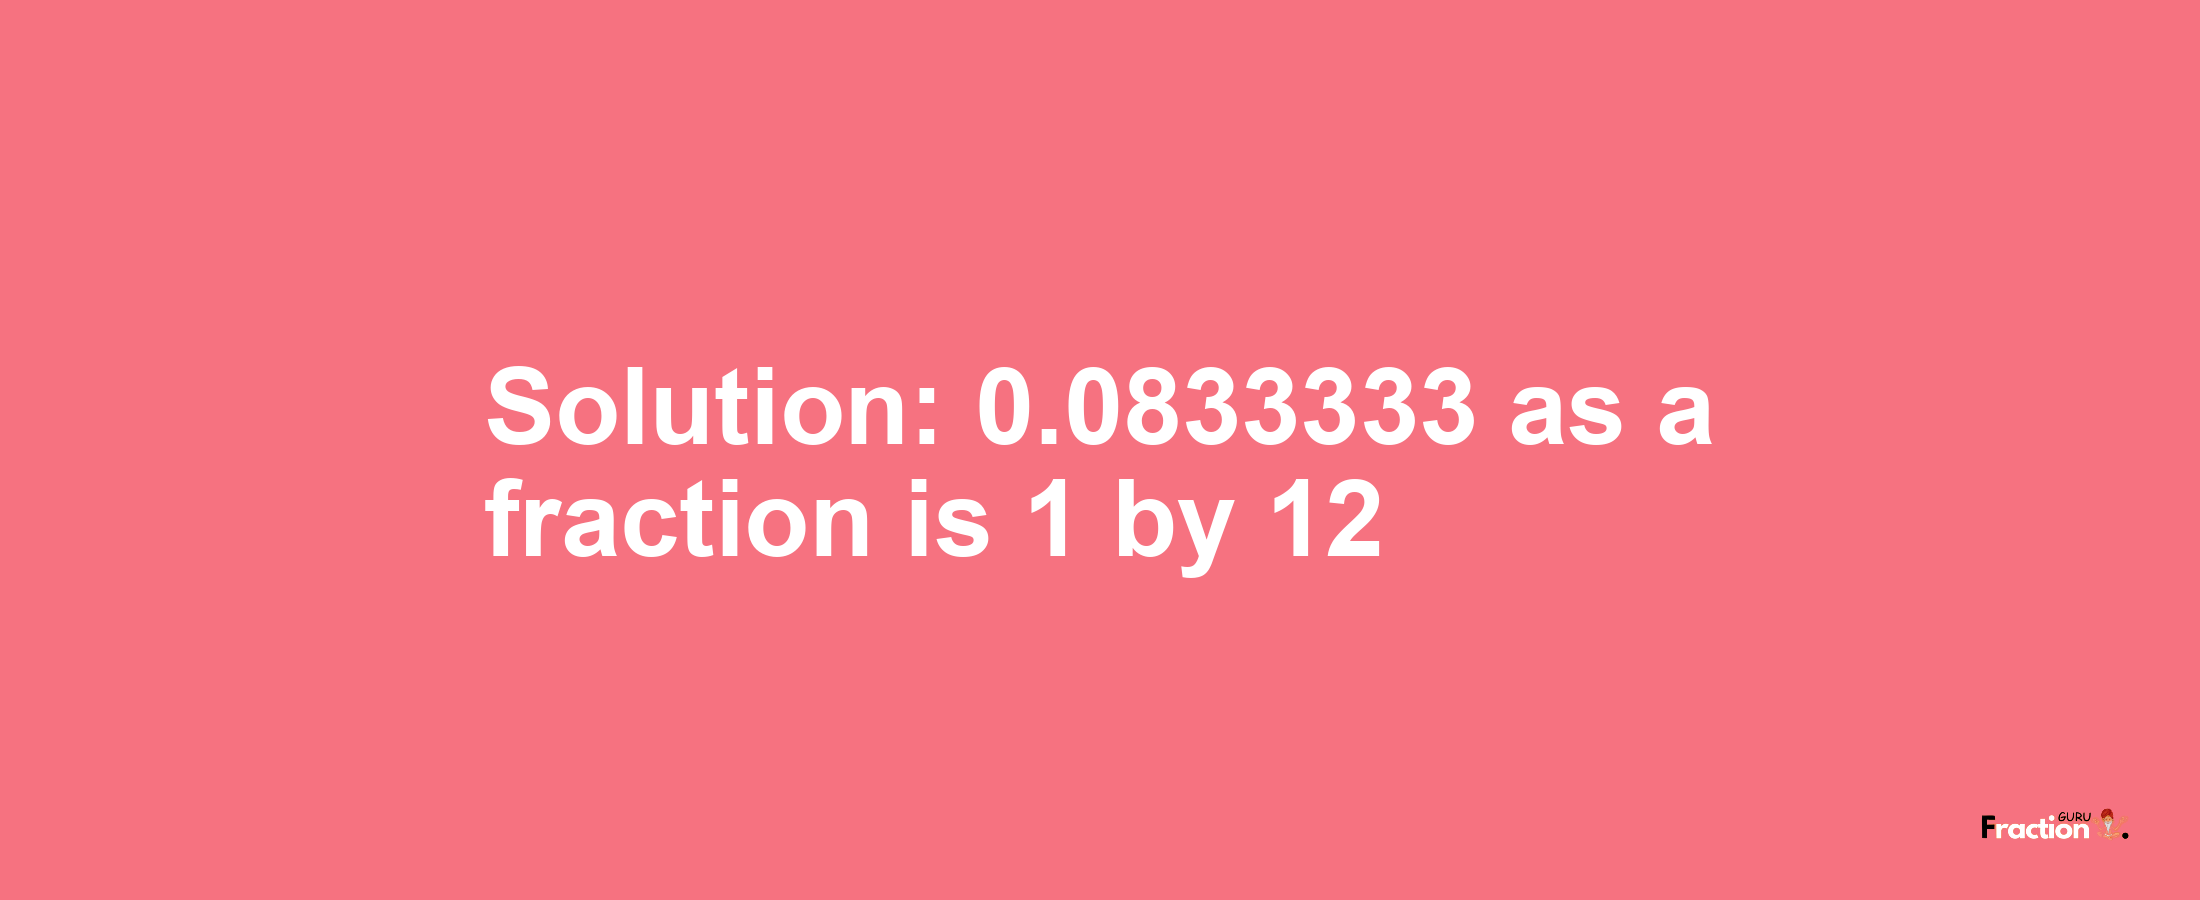 Solution:0.0833333 as a fraction is 1/12